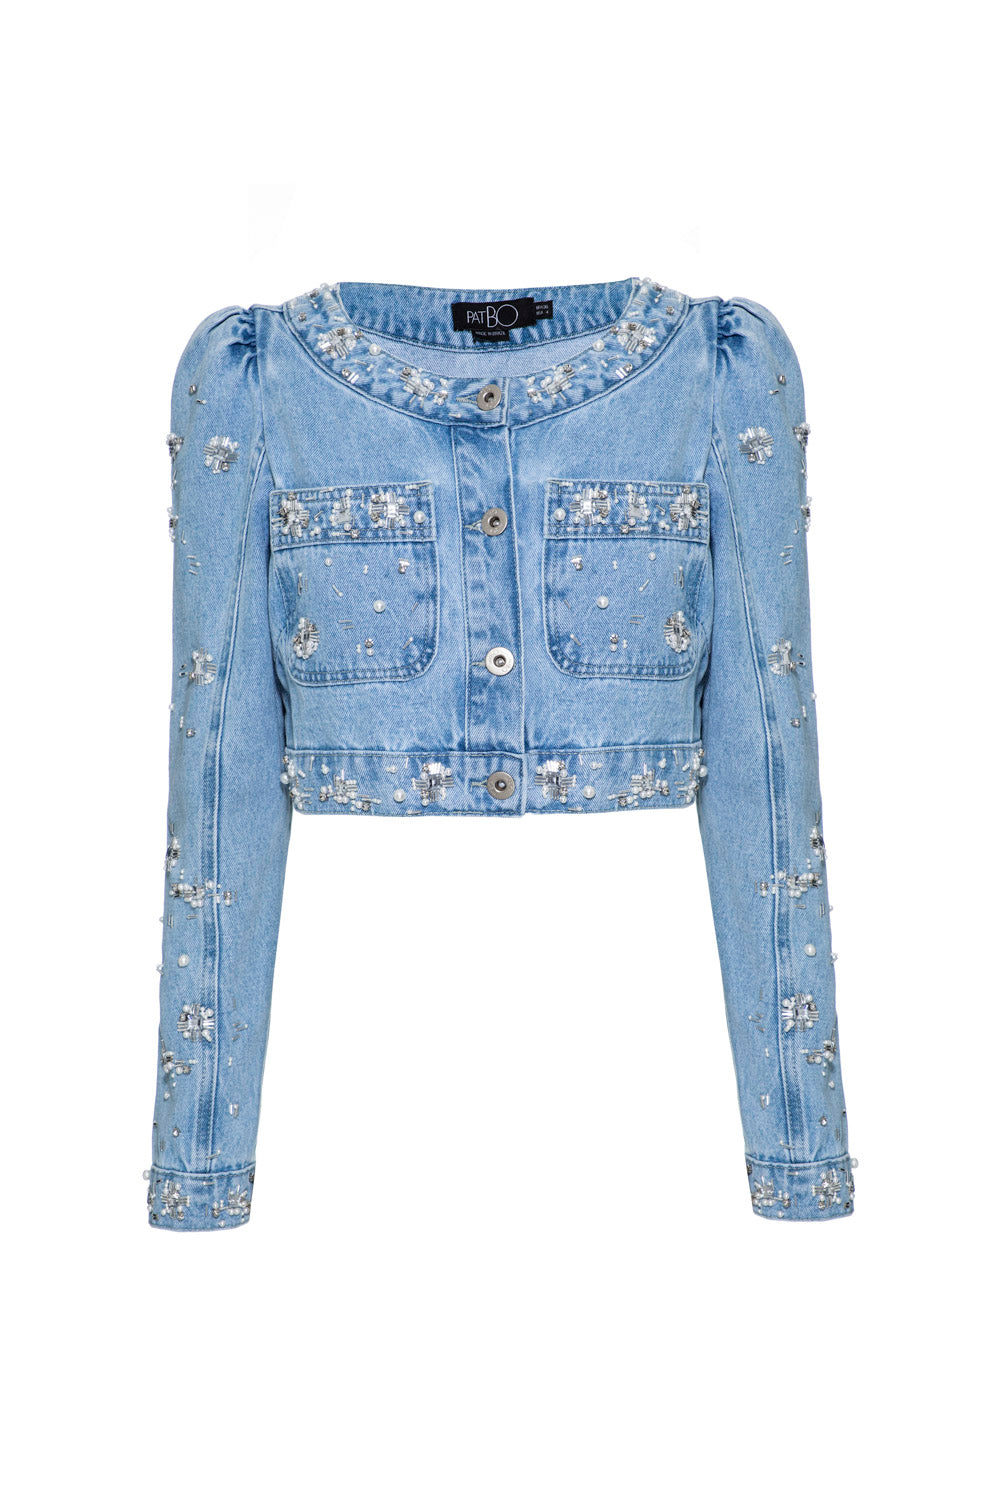 How to style beaded and embellished jean jackets